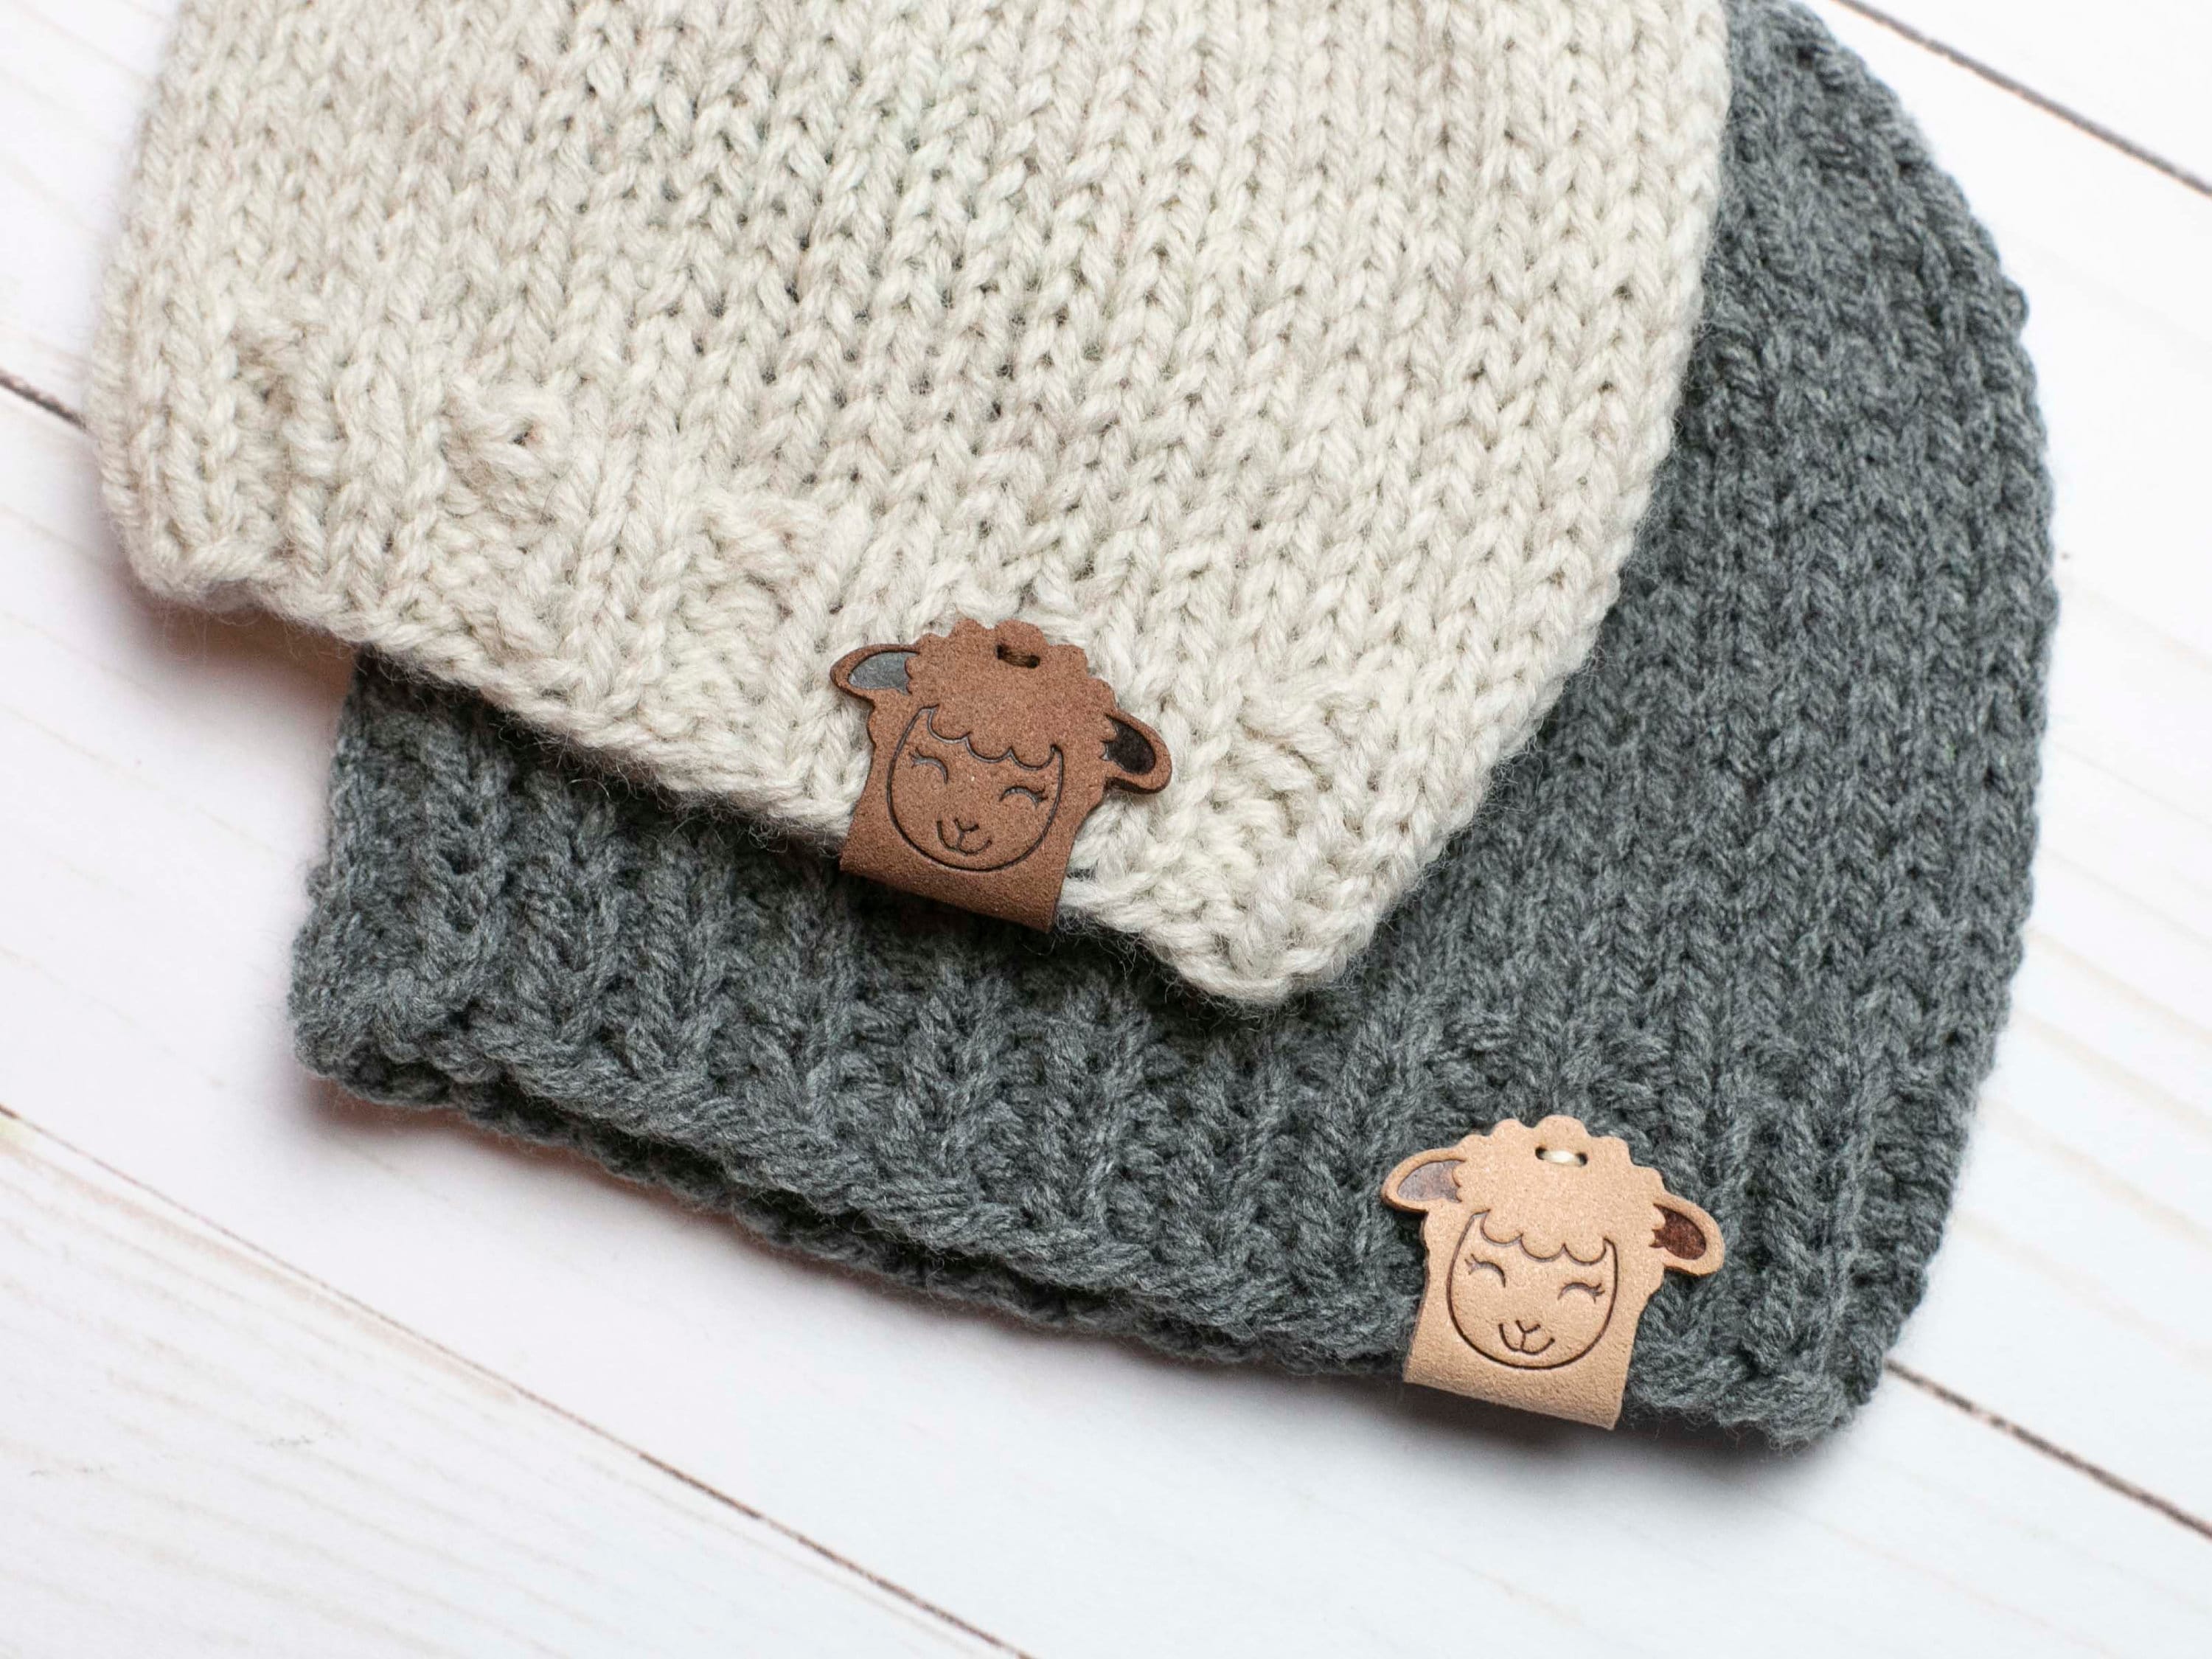 Handmade Tags for Crochet Knitting Sewing Labels, Suede, Made With Love Tags  Labels, for Hats, Blankets, Handmade Labels 